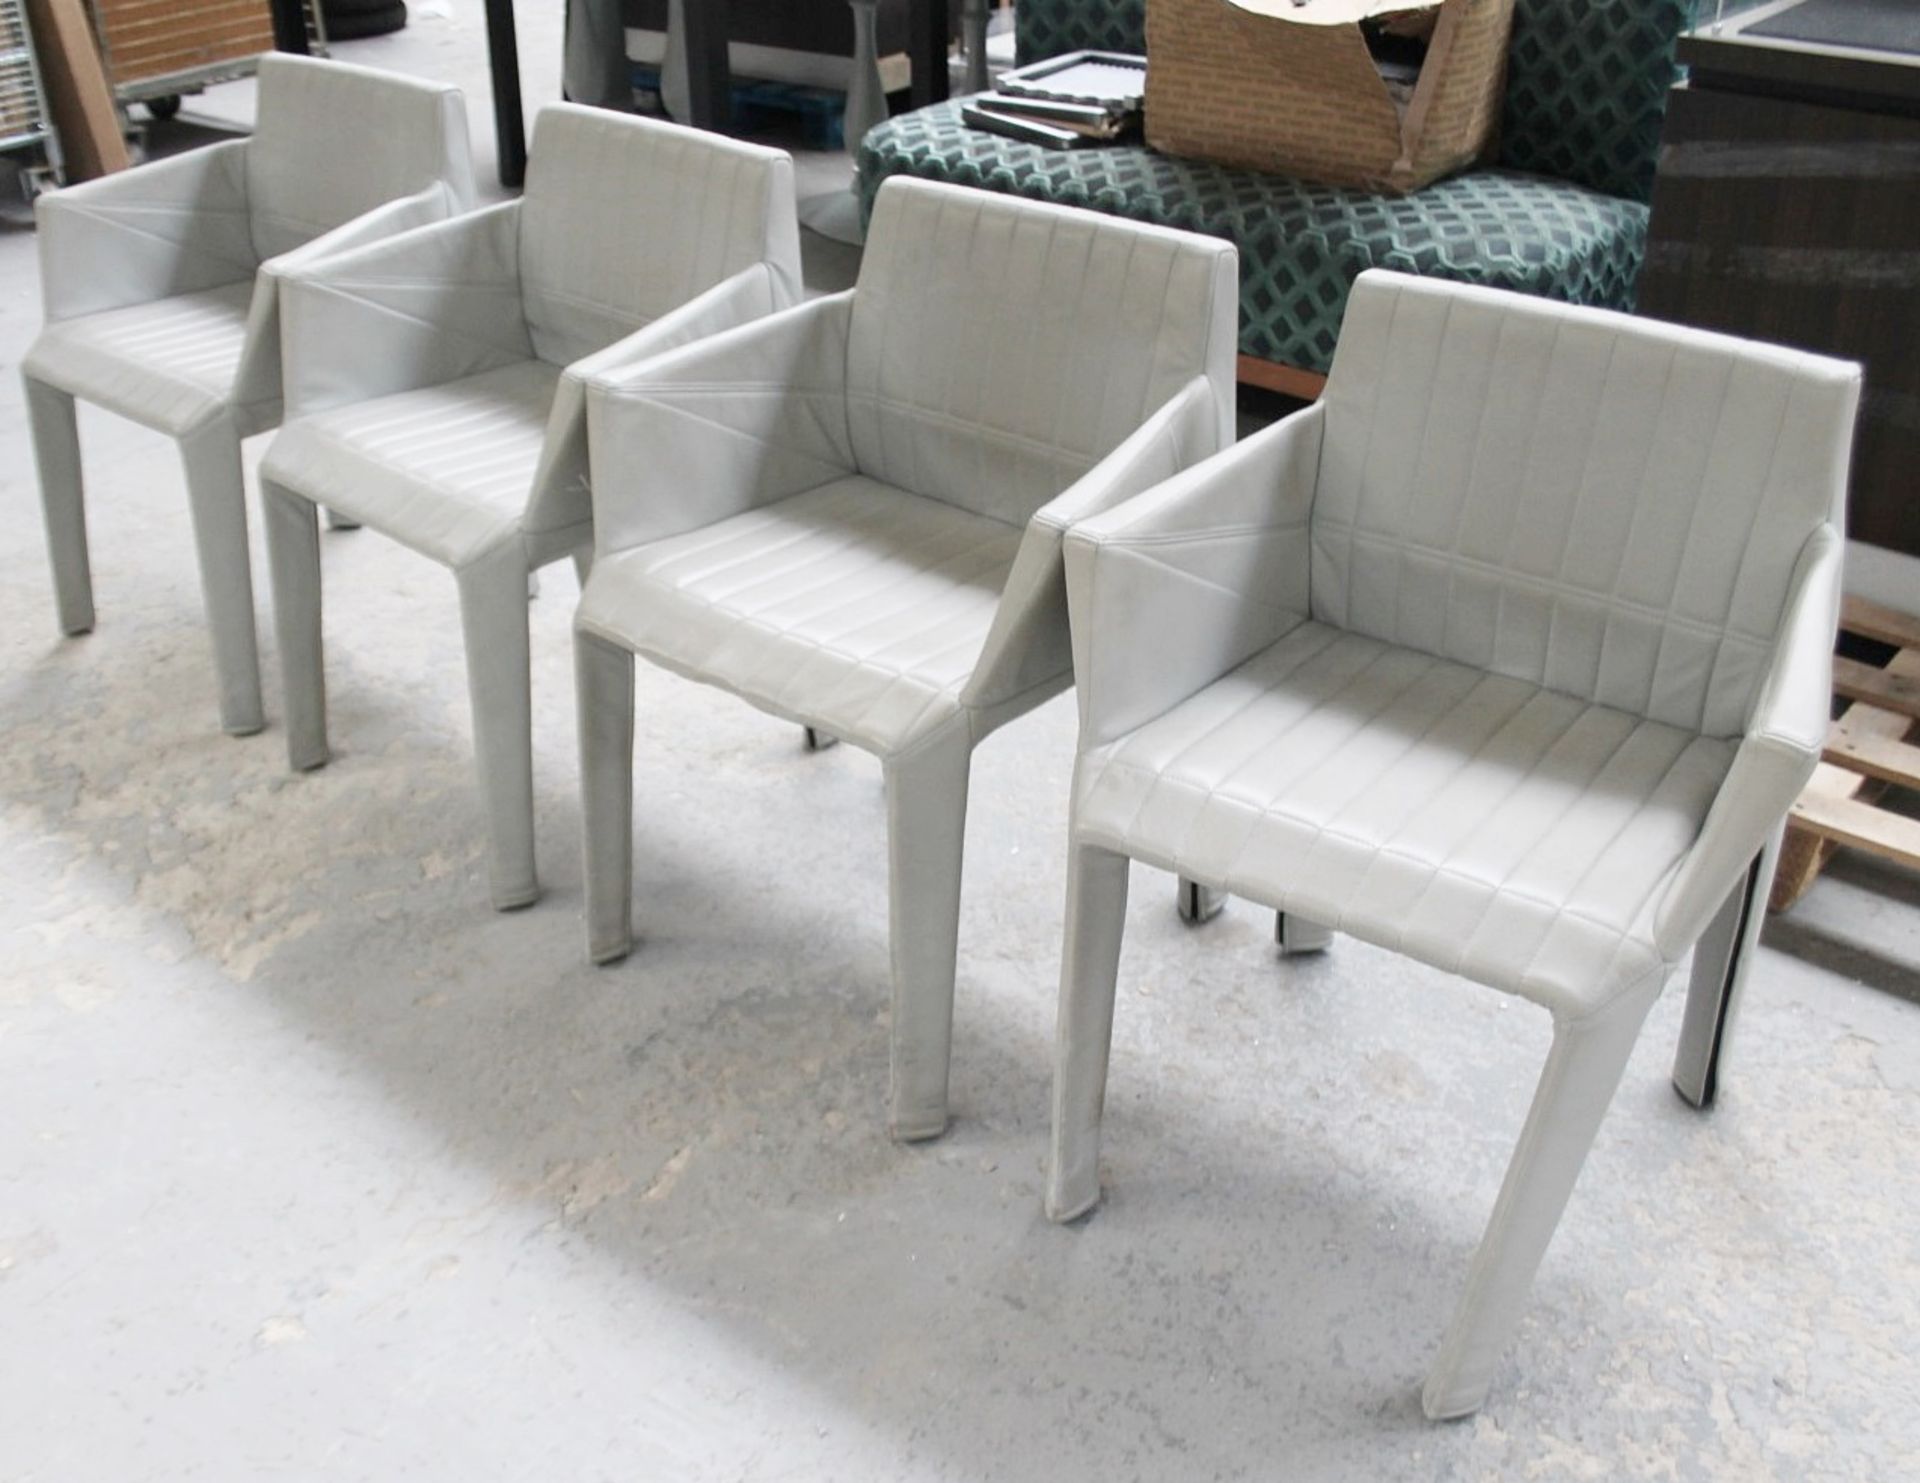 4 x LIGNE ROSET Stylish Leather Chairs - Removed From A World-renowned London Department Store - Image 2 of 11